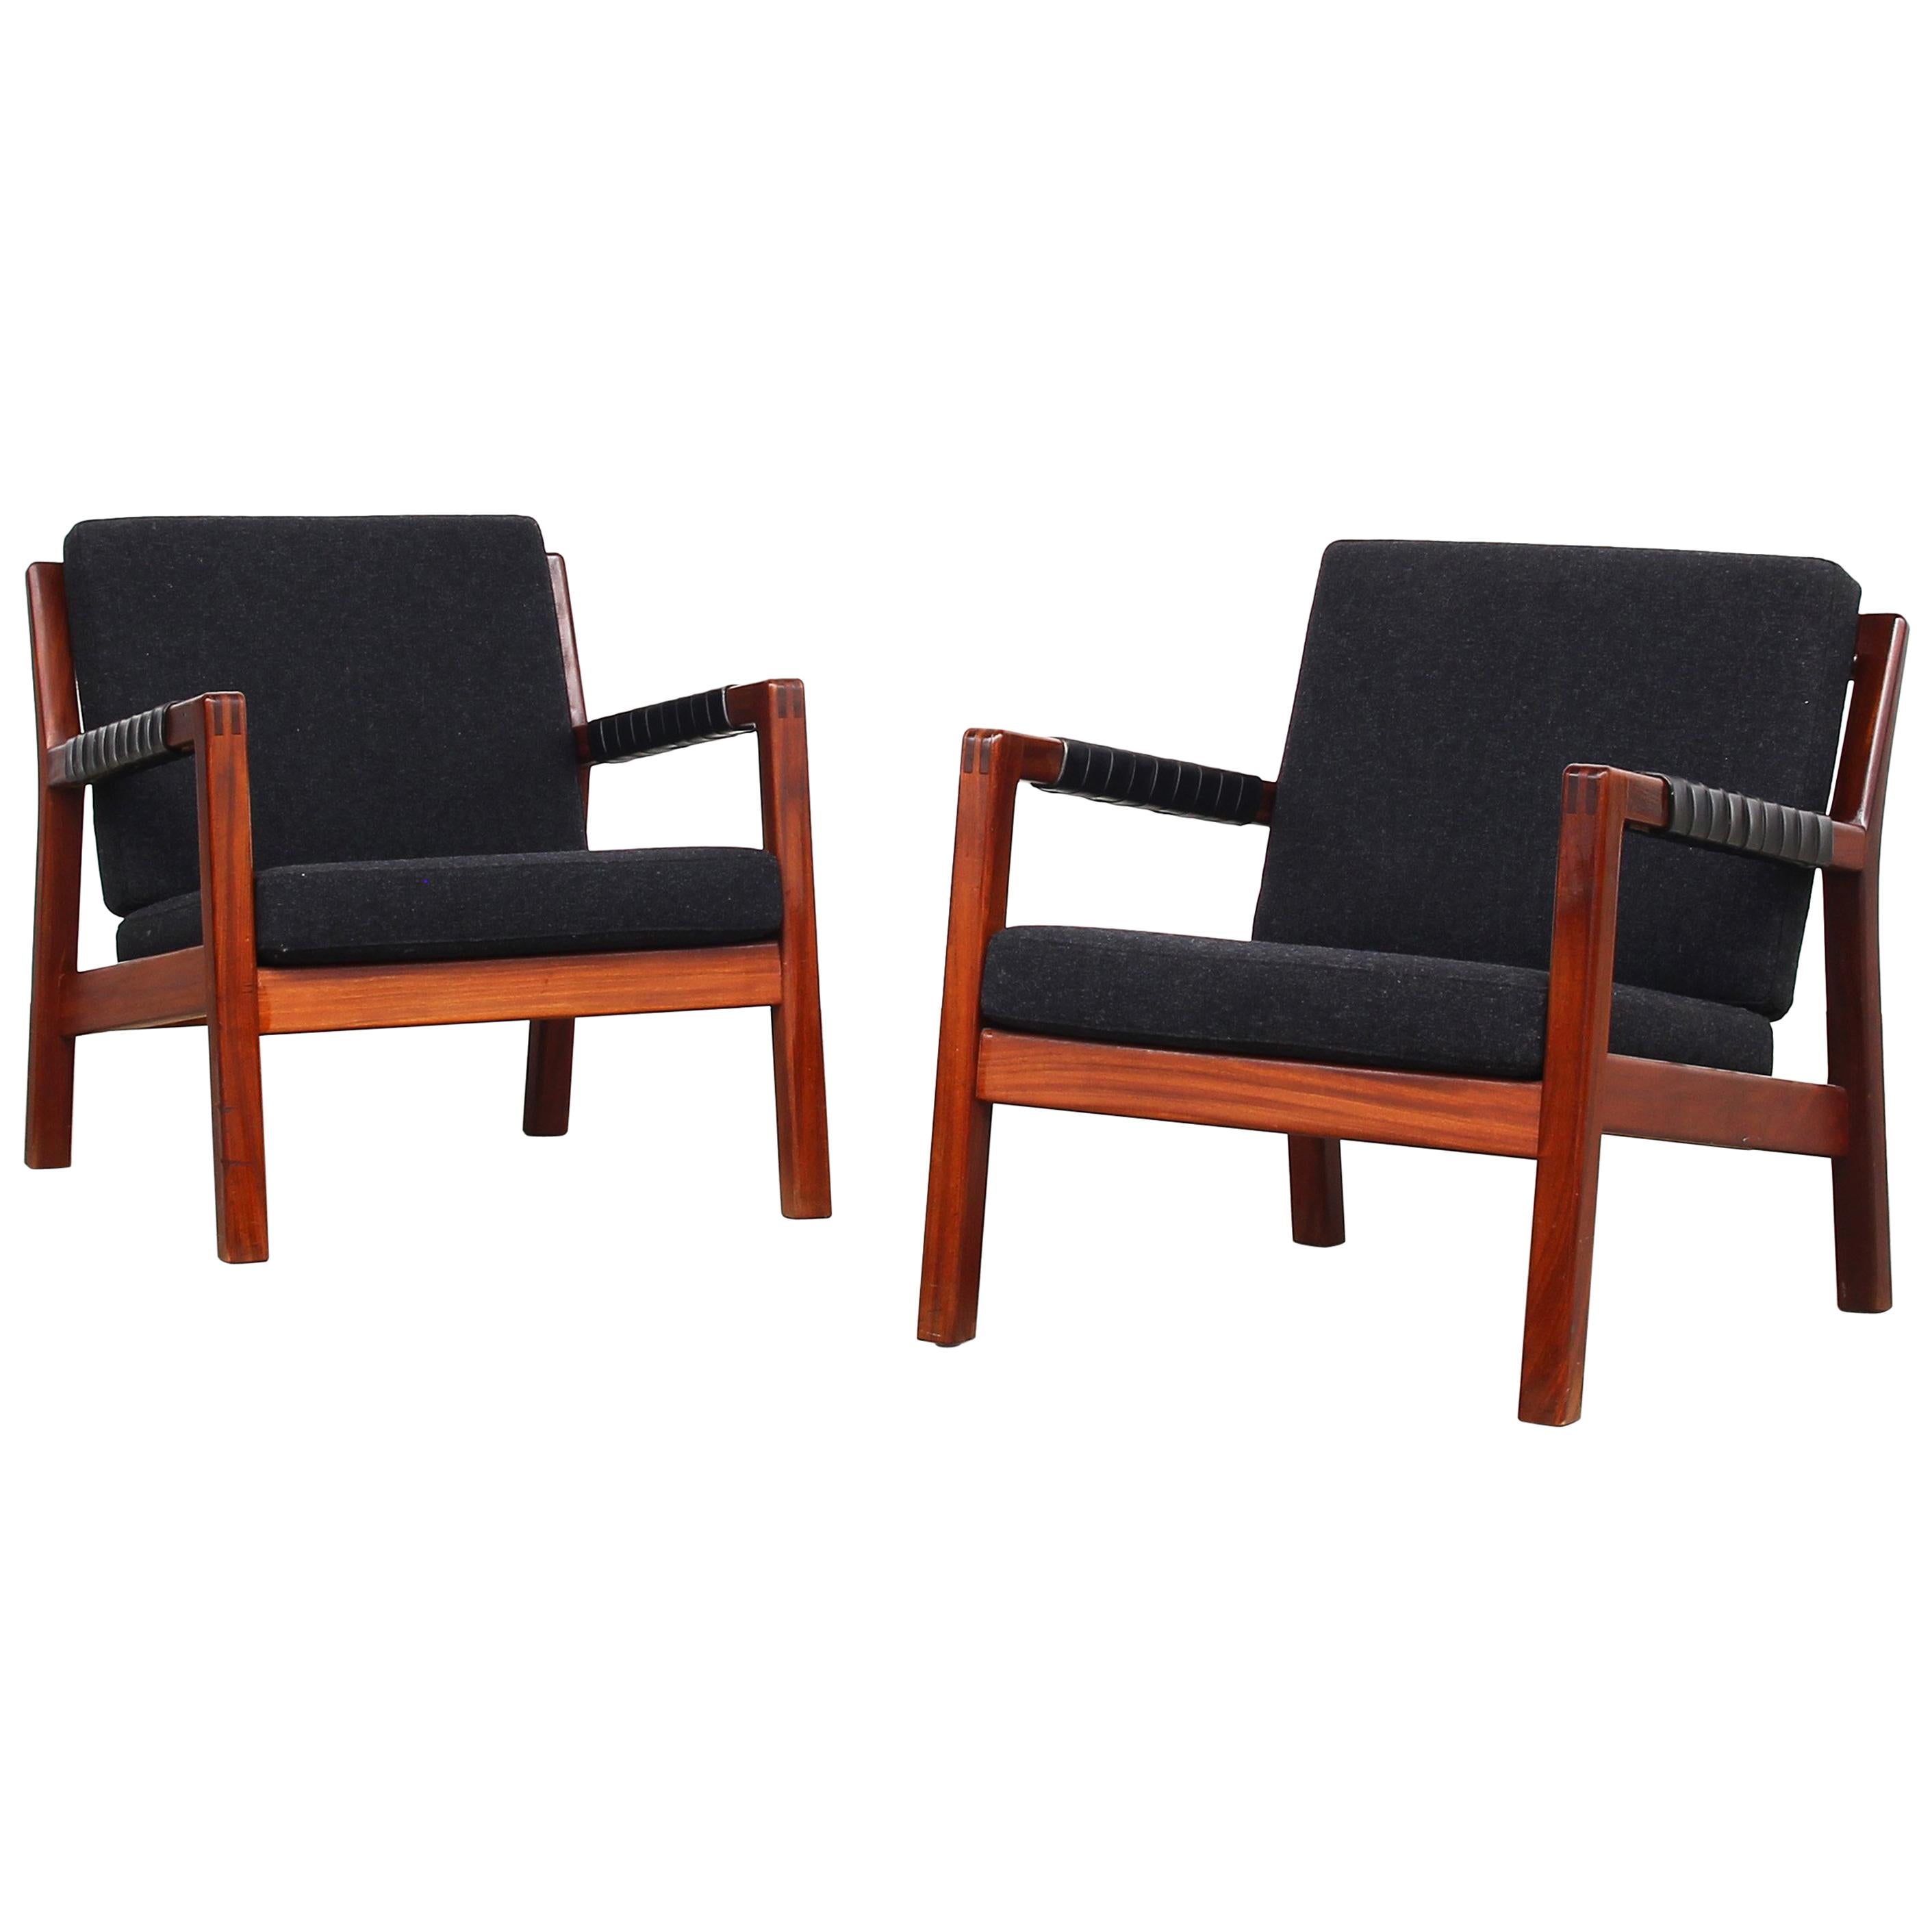 Pair of Easy Lounge Chairs by Carl Gustaf Hiort Af Örnas, Finland For Sale